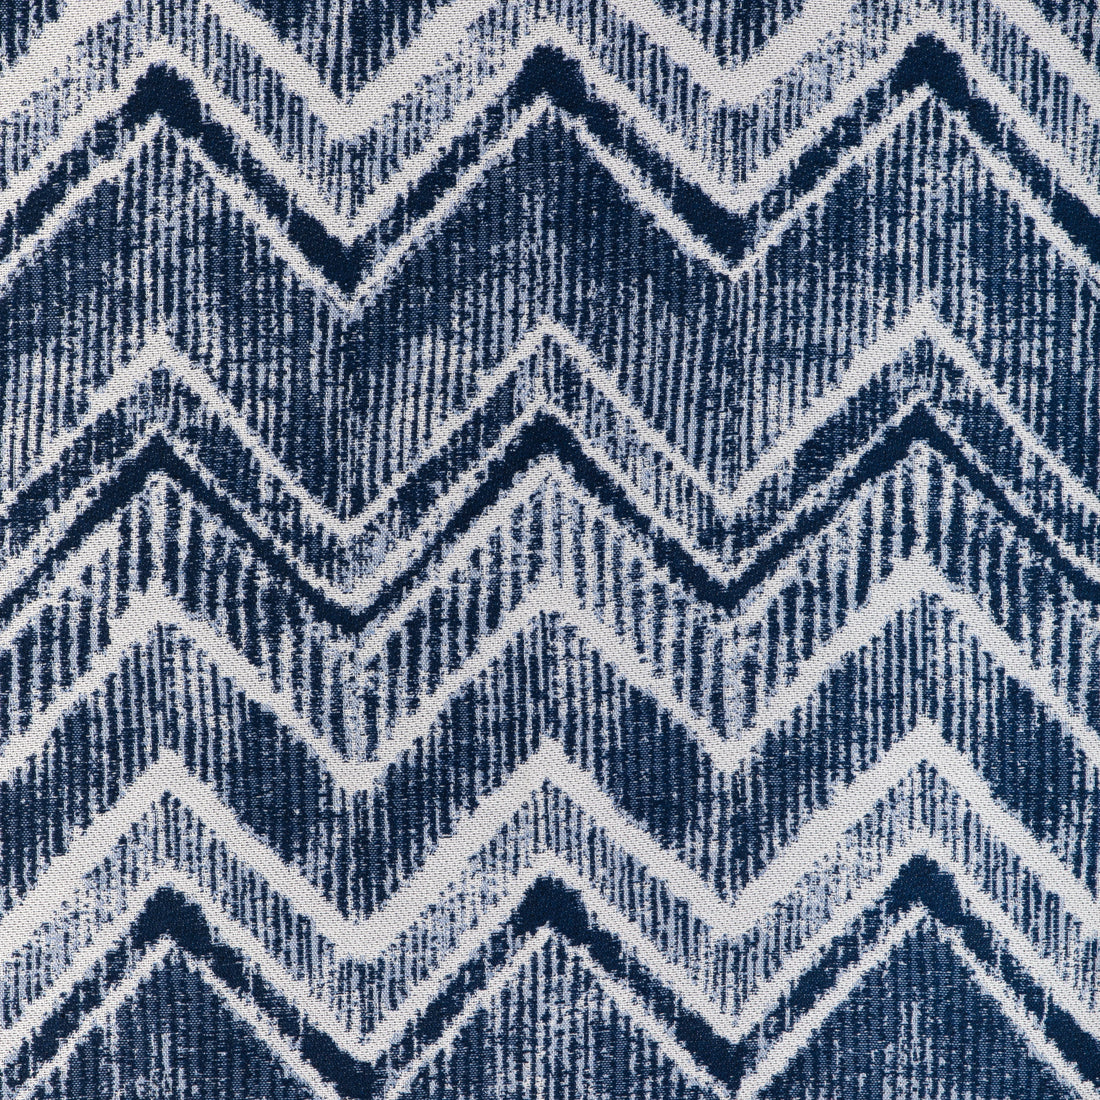 Riviera Batik fabric in marine color - pattern 36934.51.0 - by Kravet Couture in the Riviera collection